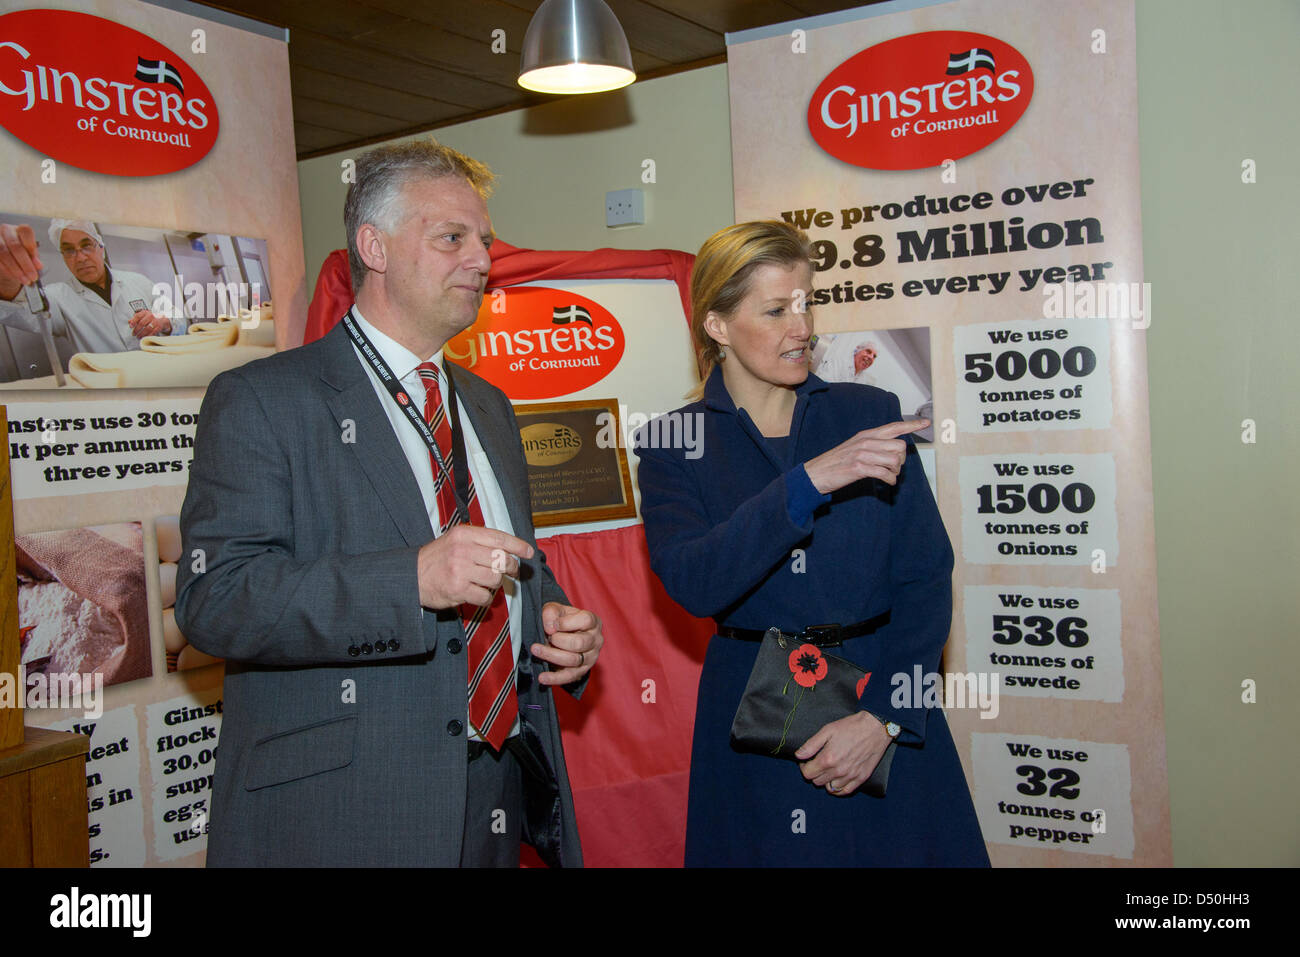 Callington, Cornwall, UK. 21st March 2013. Visit of Countess of Wessex unveiling plaque to celebrate 25th anniversary of Ginsters Callington & MD of Ginsters Mark Duddridge.  Credit:  Sean Hernon / Alamy Live News Stock Photo